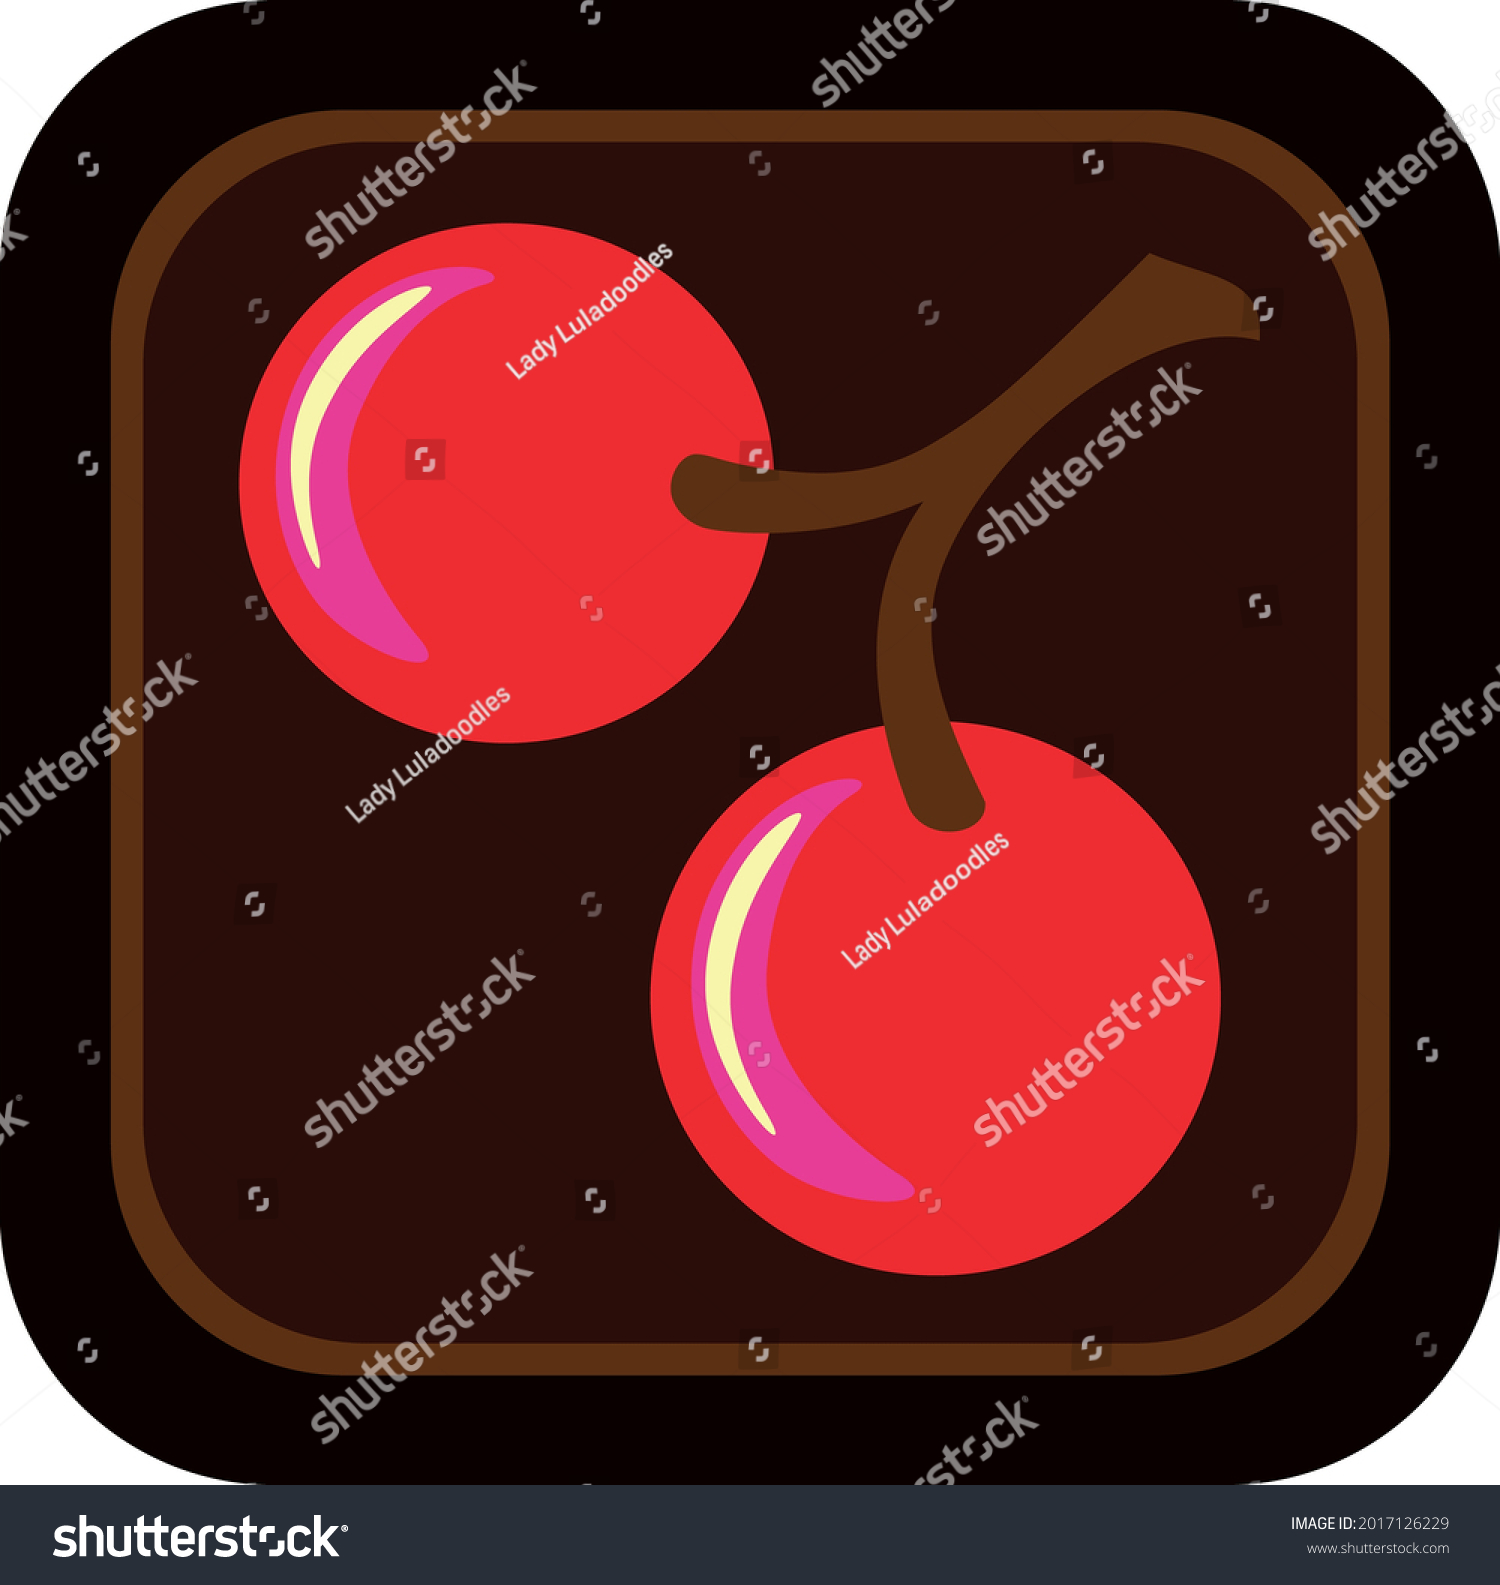 SVG of Dark brown square Chocolate candy with lighter striped border and candied red cherry decoration. Layered confectionary SVG svg